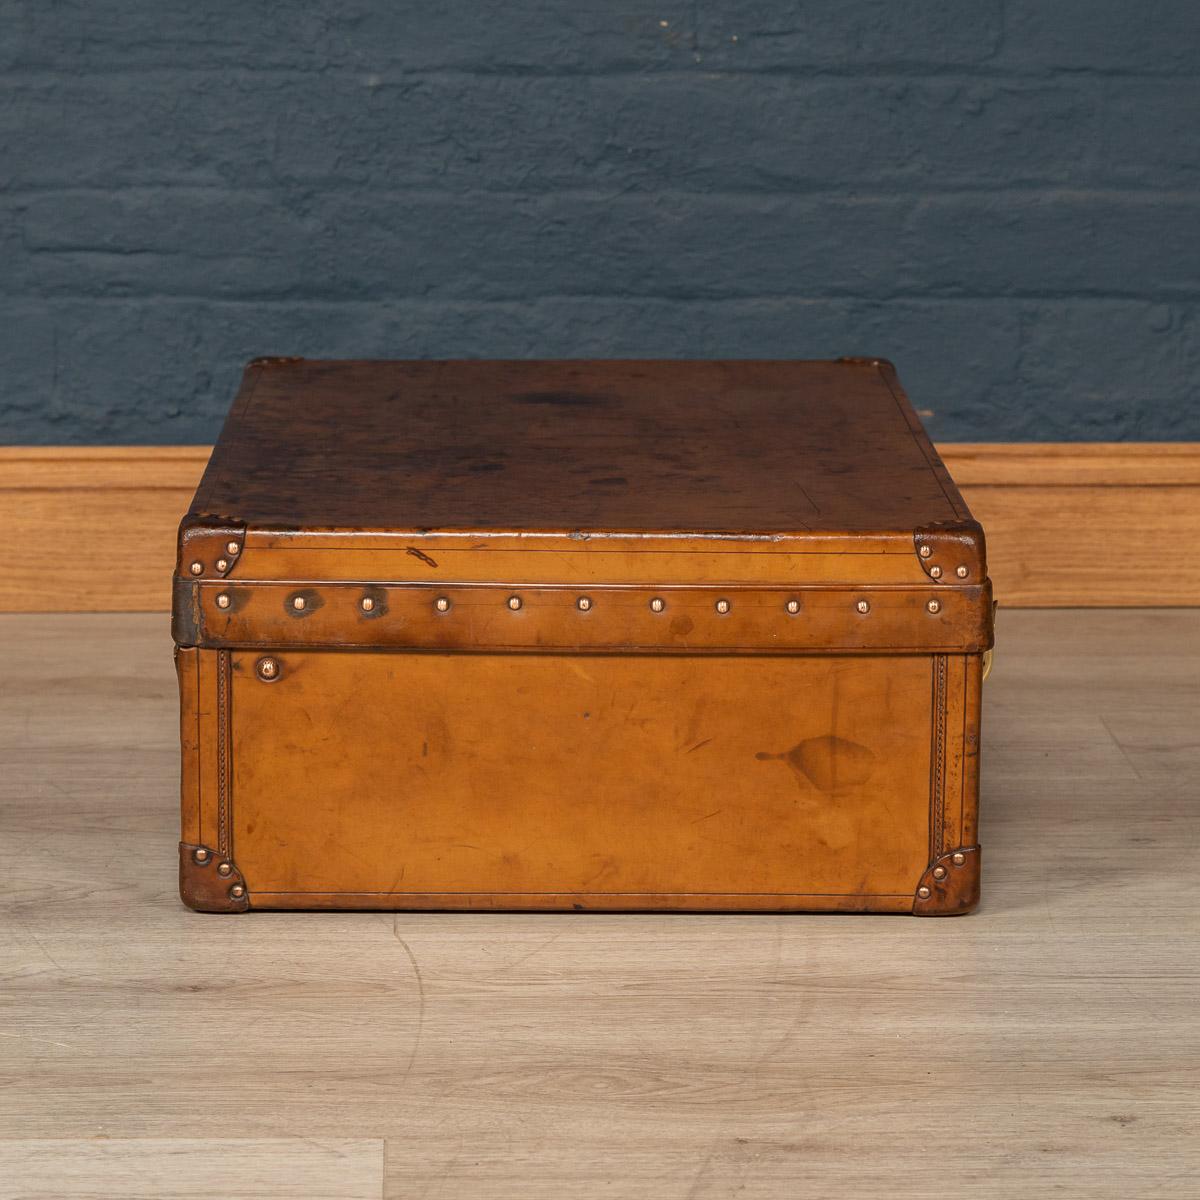 Cowhide 20th Century Louis Vuitton Suitcase in Natural Cow Hide, France, circa 1900